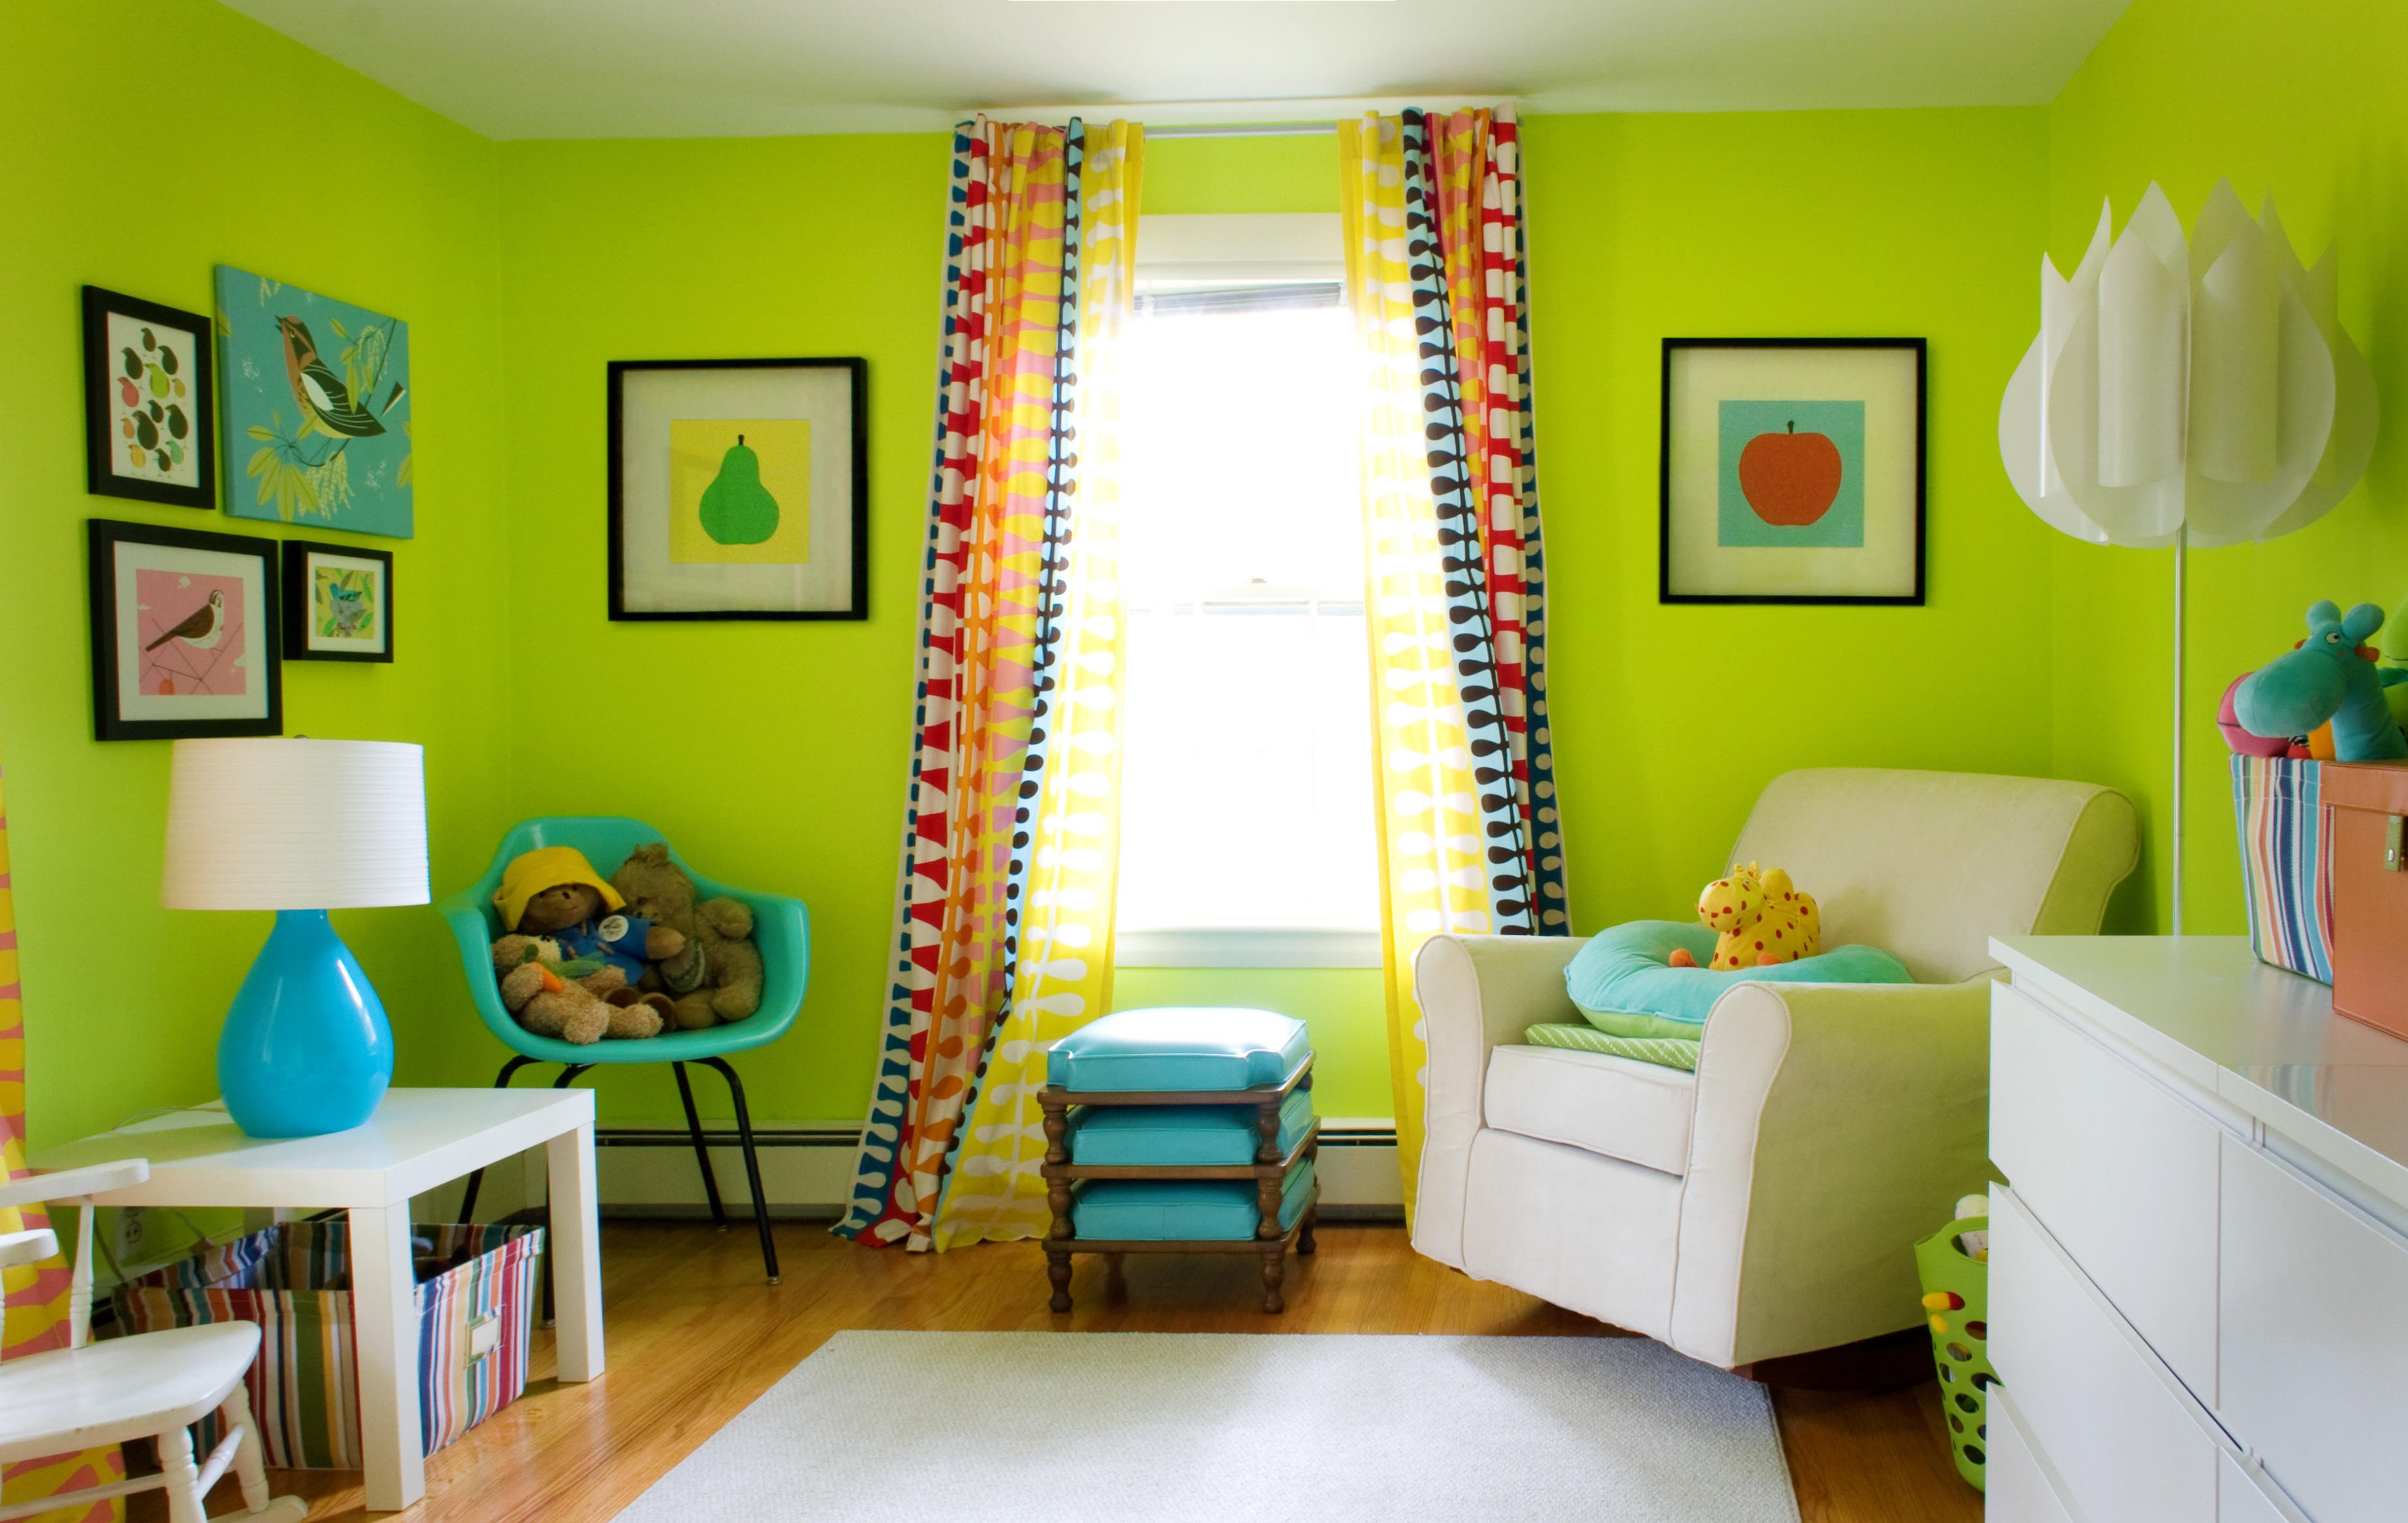 Lime Green Living Room Decor Awesome Lime Green Living Room Design with Fresh Colors Home